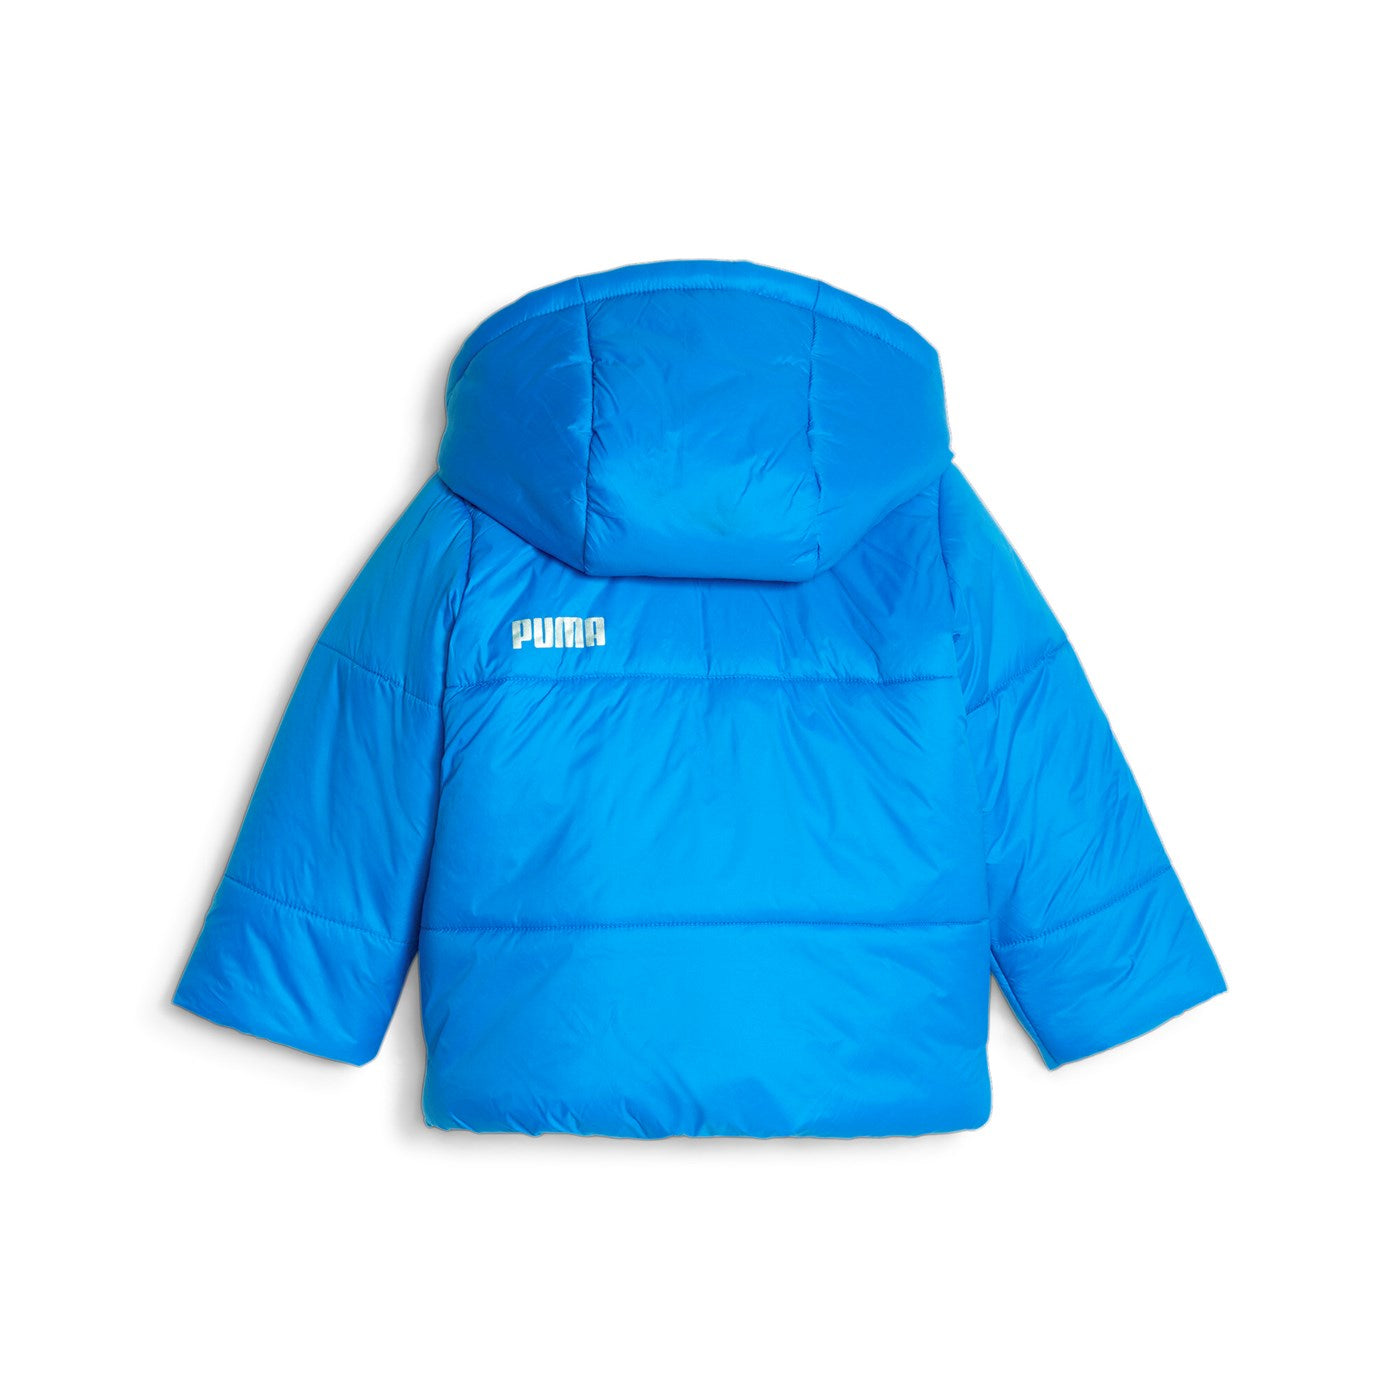 Puma hooded jacket for infants and children Minicats 675971-47 light blue